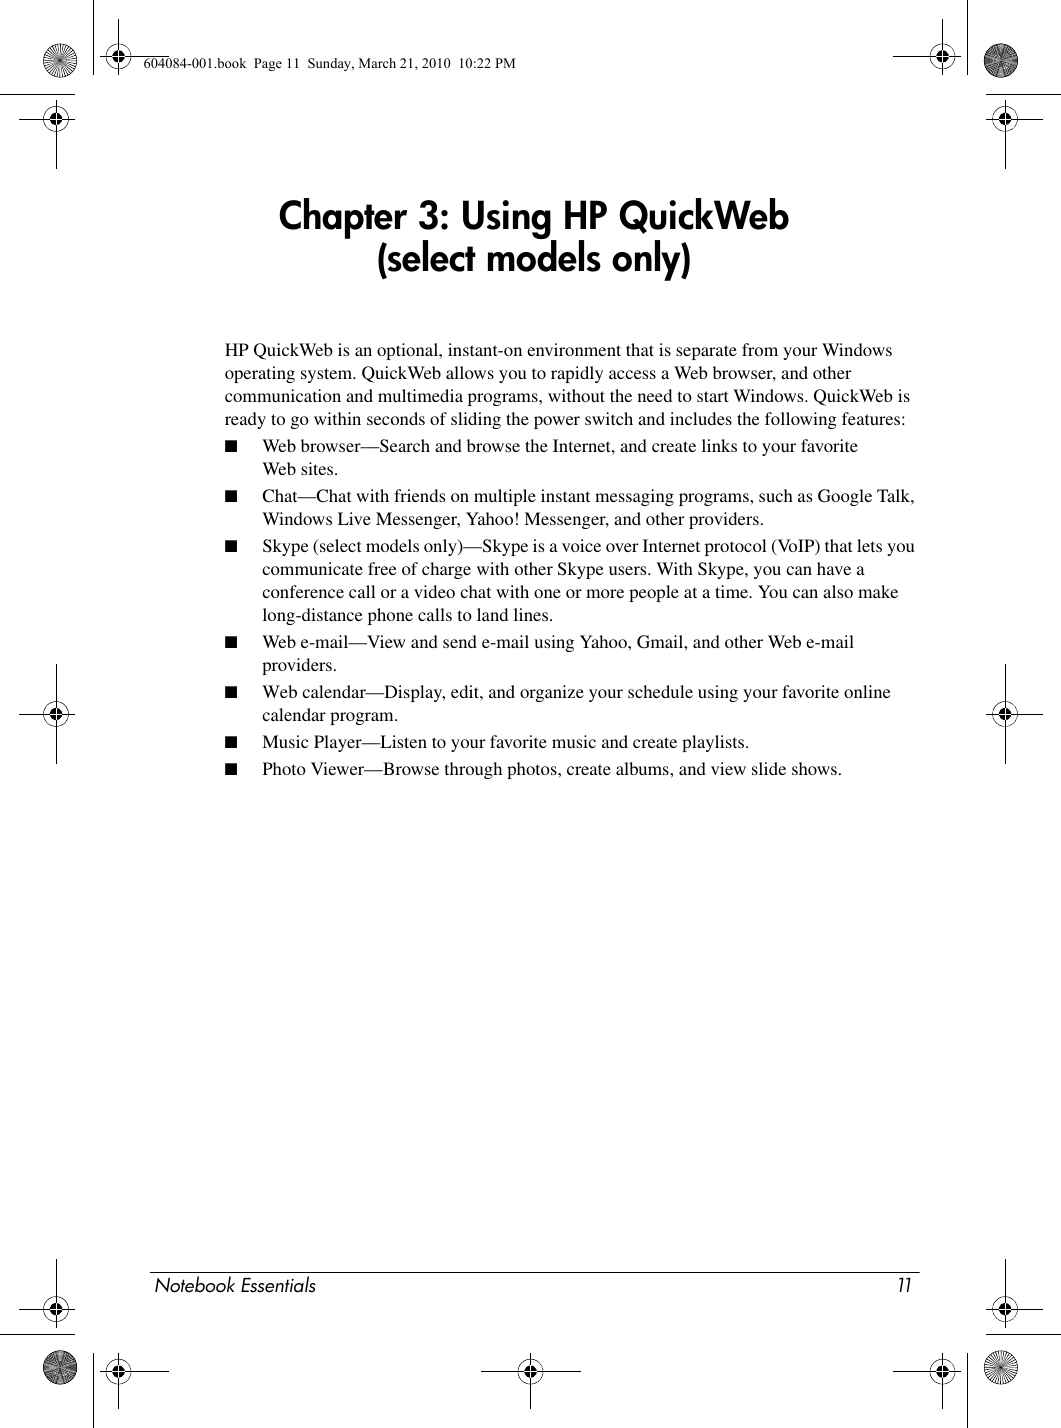 Notebook Essentials 11Chapter 3: Using HP QuickWeb (select models only)HP QuickWeb is an optional, instant-on environment that is separate from your Windows operating system. QuickWeb allows you to rapidly access a Web browser, and other communication and multimedia programs, without the need to start Windows. QuickWeb is ready to go within seconds of sliding the power switch and includes the following features:■Web browser—Search and browse the Internet, and create links to your favorite Web sites.■Chat—Chat with friends on multiple instant messaging programs, such as Google Talk, Windows Live Messenger, Yahoo! Messenger, and other providers.■Skype (select models only)—Skype is a voice over Internet protocol (VoIP) that lets you communicate free of charge with other Skype users. With Skype, you can have a conference call or a video chat with one or more people at a time. You can also make long-distance phone calls to land lines.■Web e-mail—View and send e-mail using Yahoo, Gmail, and other Web e-mail providers.■Web calendar—Display, edit, and organize your schedule using your favorite online calendar program.■Music Player—Listen to your favorite music and create playlists.■Photo Viewer—Browse through photos, create albums, and view slide shows.604084-001.book  Page 11  Sunday, March 21, 2010  10:22 PM